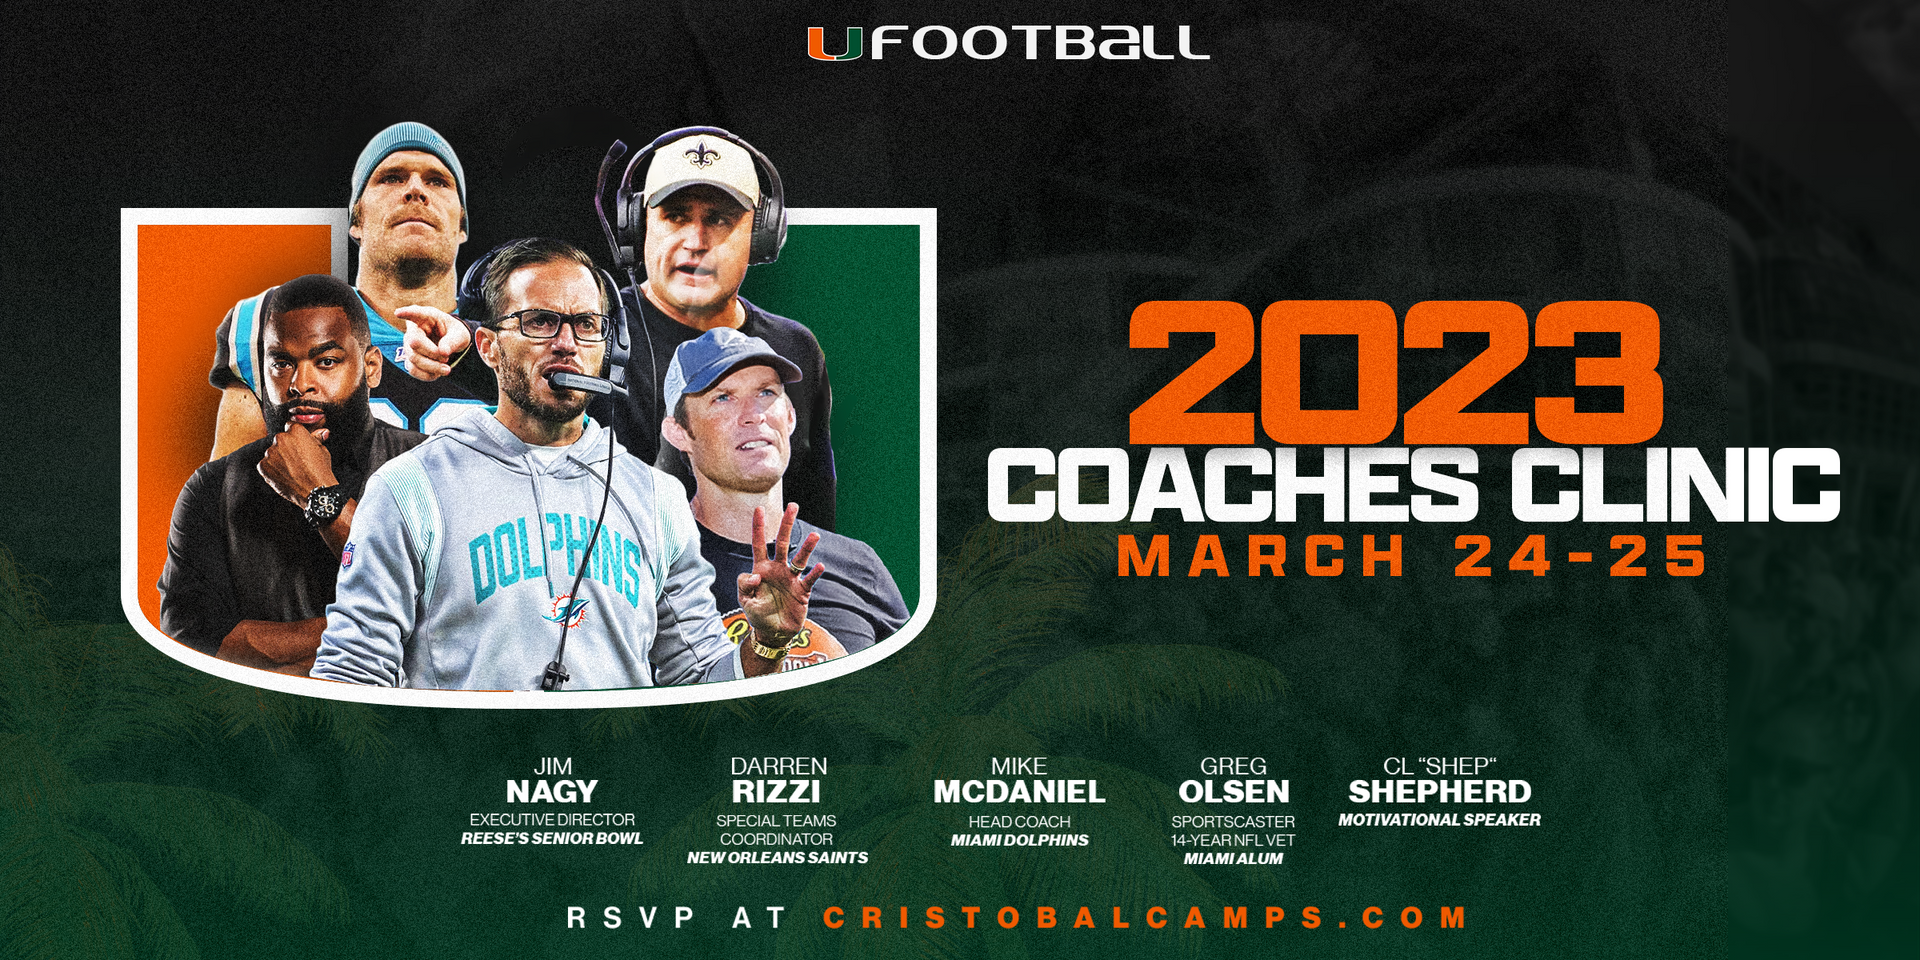 Register for Football Coaches Clinic: March 24-25